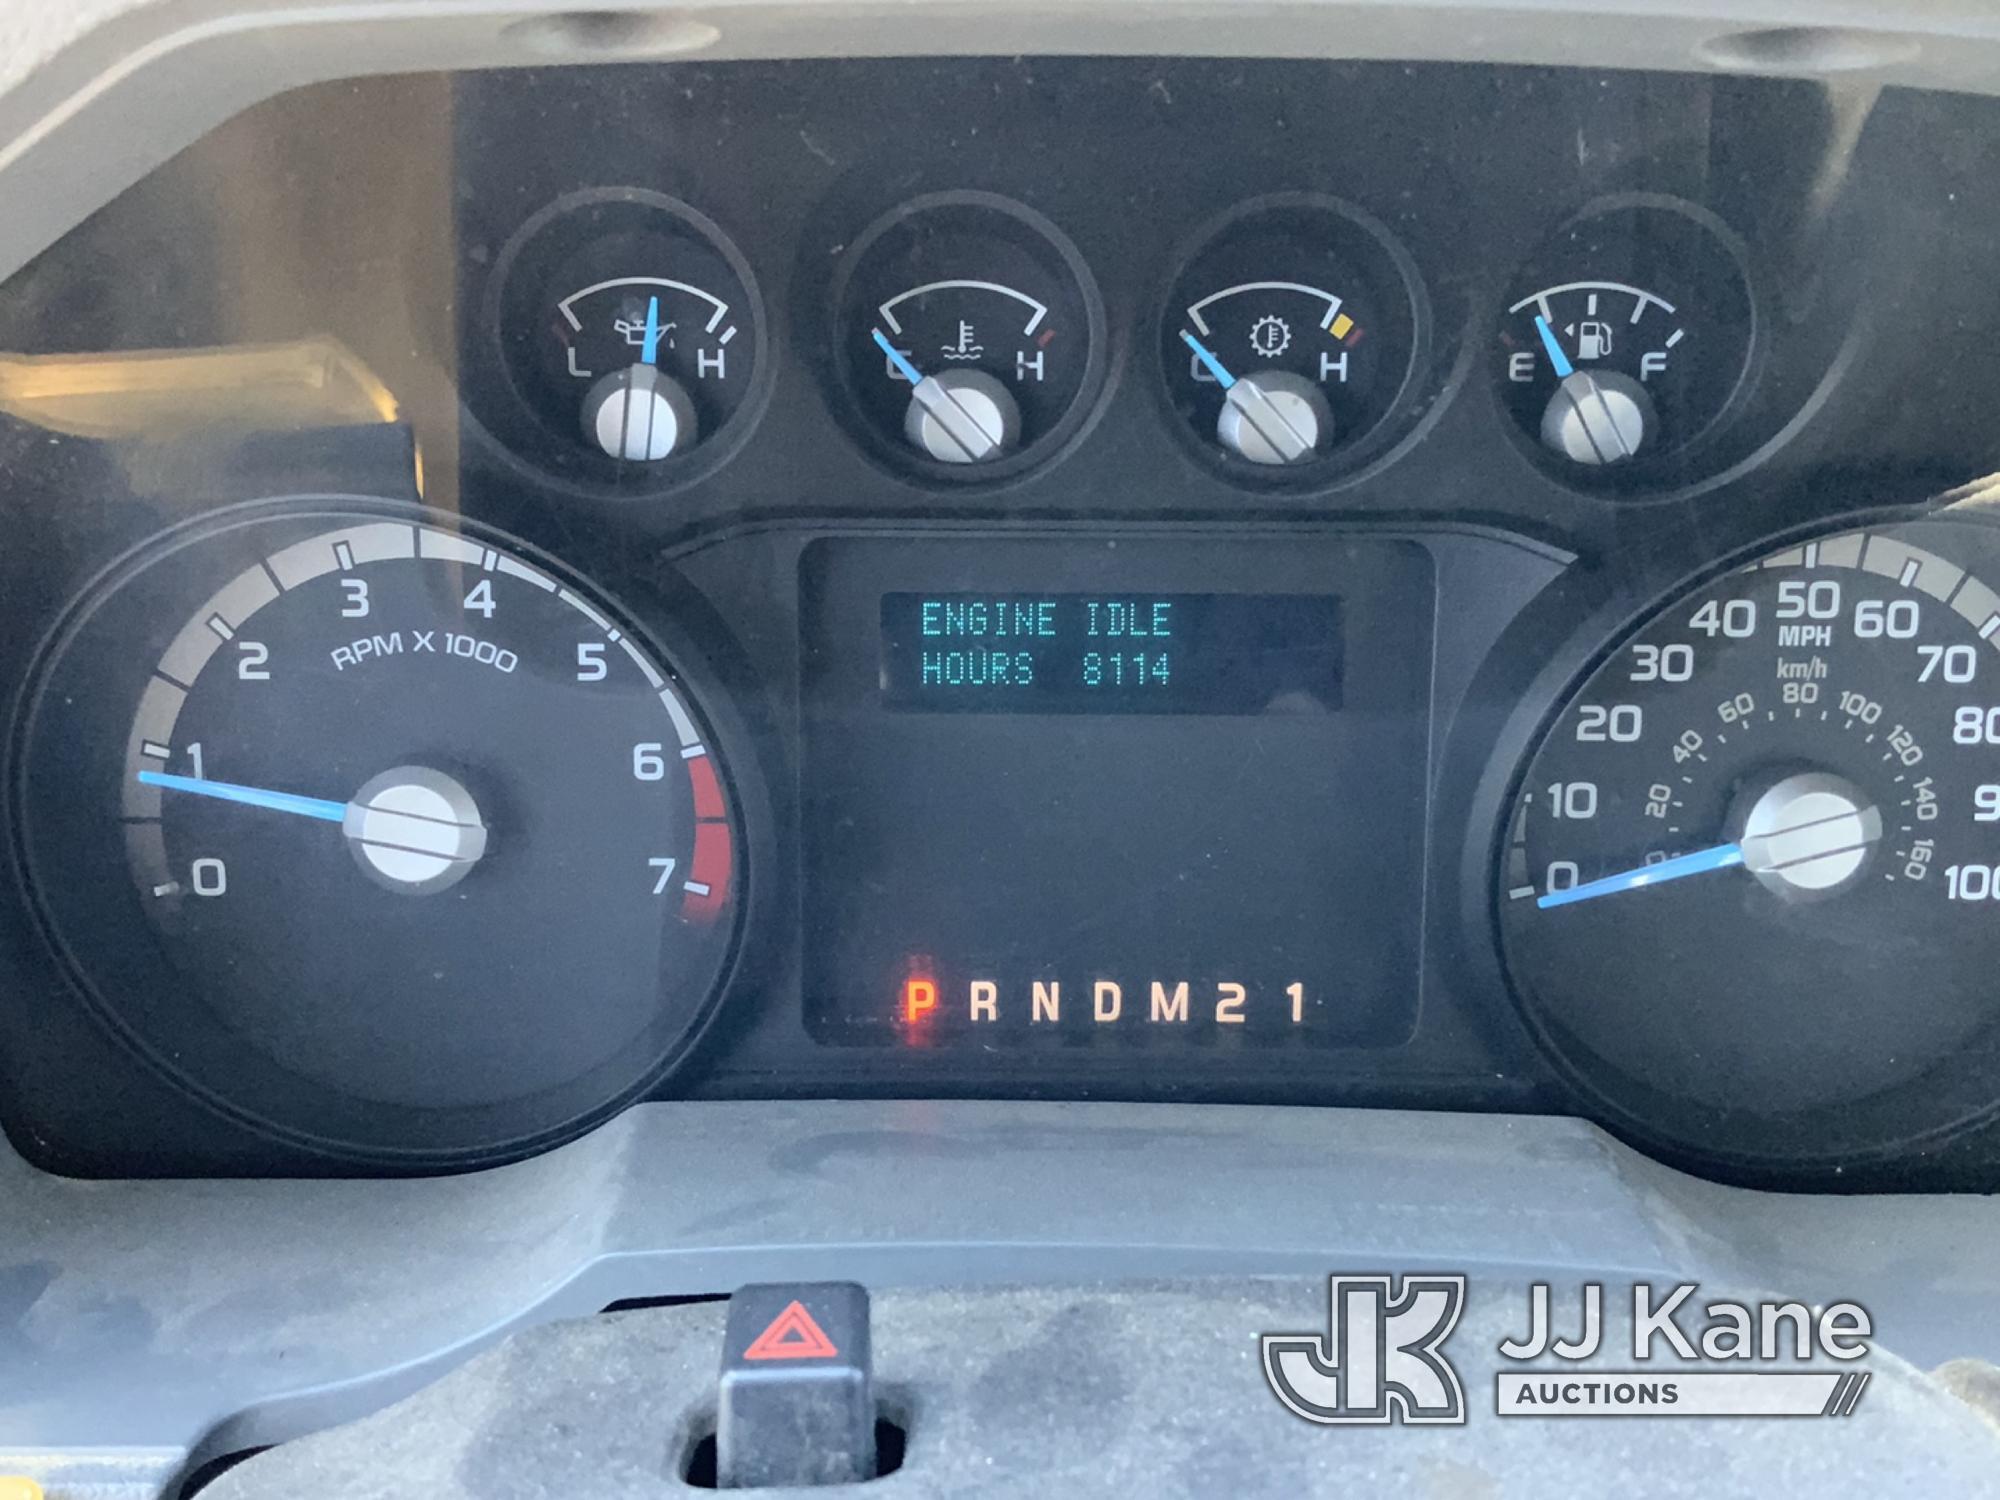 (South Beloit, IL) 2016 Ford F250 4x4 Extended-Cab Pickup Truck, with Go Light, Bulkhead and Weather